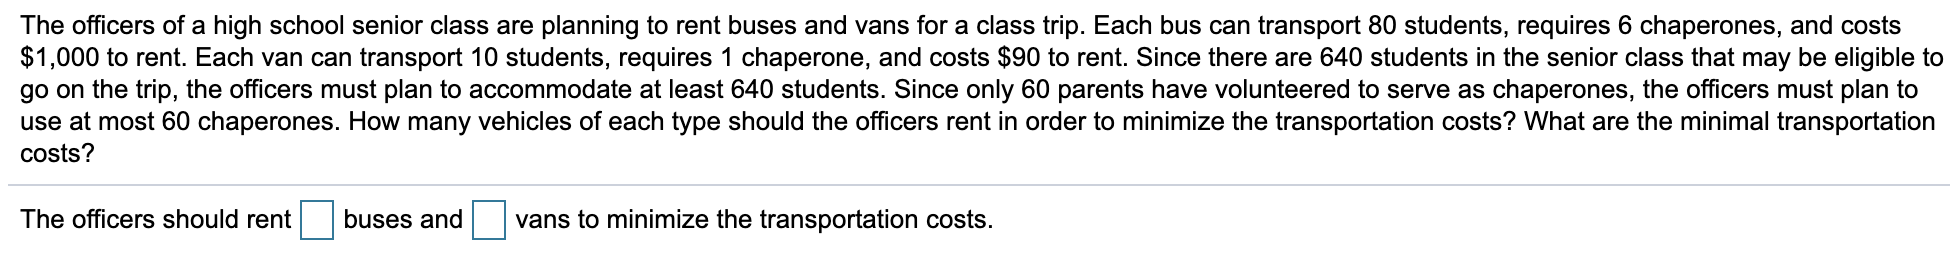 The officers of a high school senior class are planning to rent buses and vans for a class trip. Each bus can transport 80 students, requires 6 chaperones, and costs
$1,000 to rent. Each van can transport 10 students, requires 1 chaperone, and costs $90 to rent. Since there are 640 students in the senior class that may be eligible to
go on the trip, the officers must plan to accommodate at least 640 students. Since only 60 parents have volunteered to serve as chaperones, the officers must plan to
use at most 60 chaperones. How many vehicles of each type should the officers rent in order to minimize the transportation costs? What are the minimal transportation
costs?
The officers should rent
buses and
vans to minimize the transportation costs.
